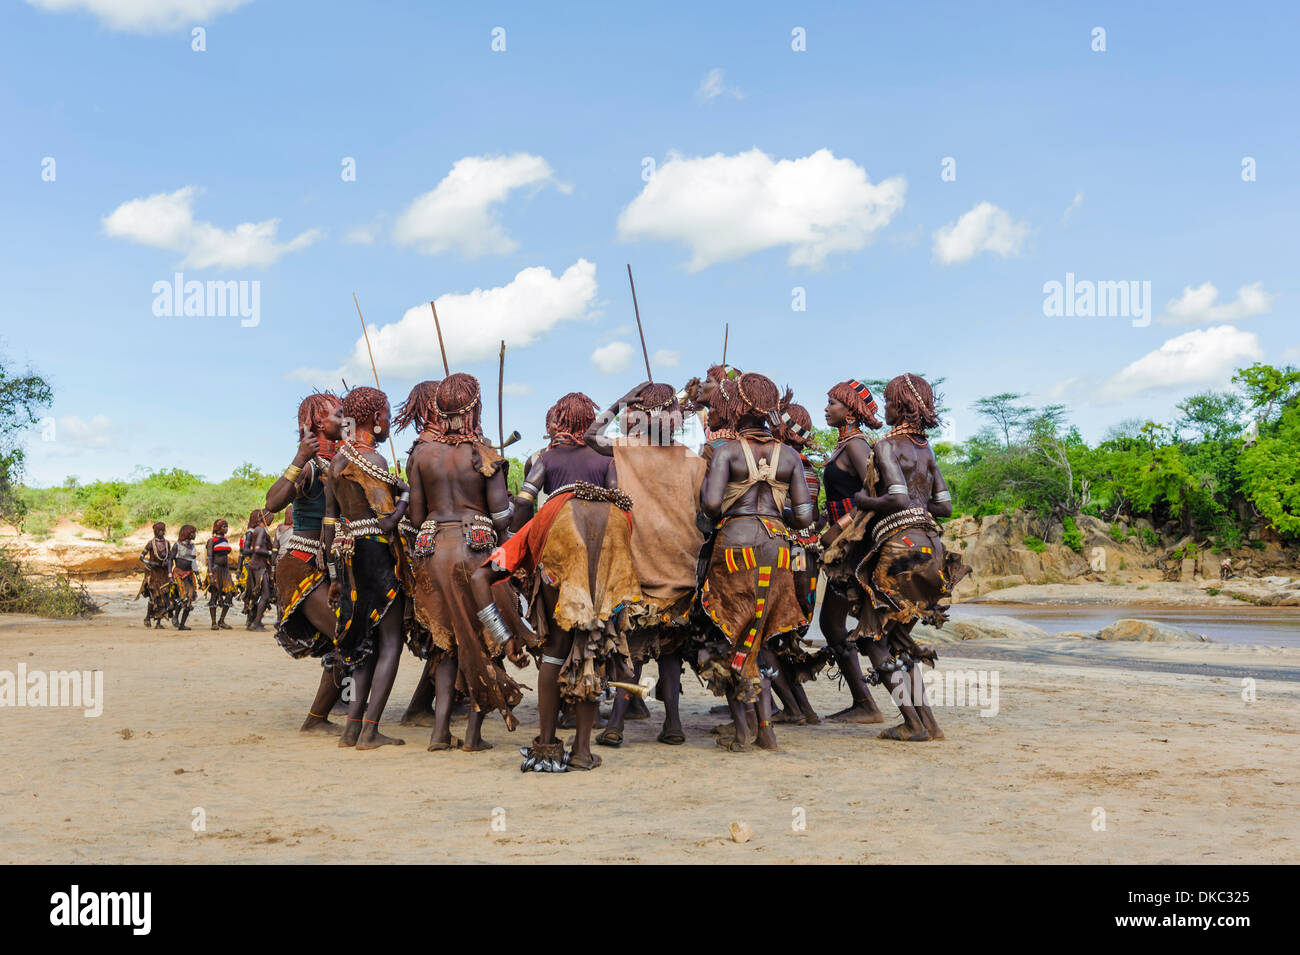 Women dancing during a bull jumping ceremony. A rite of passage from boys to men. Hamer tribe, Omo valley, Ethiopia Stock Photo